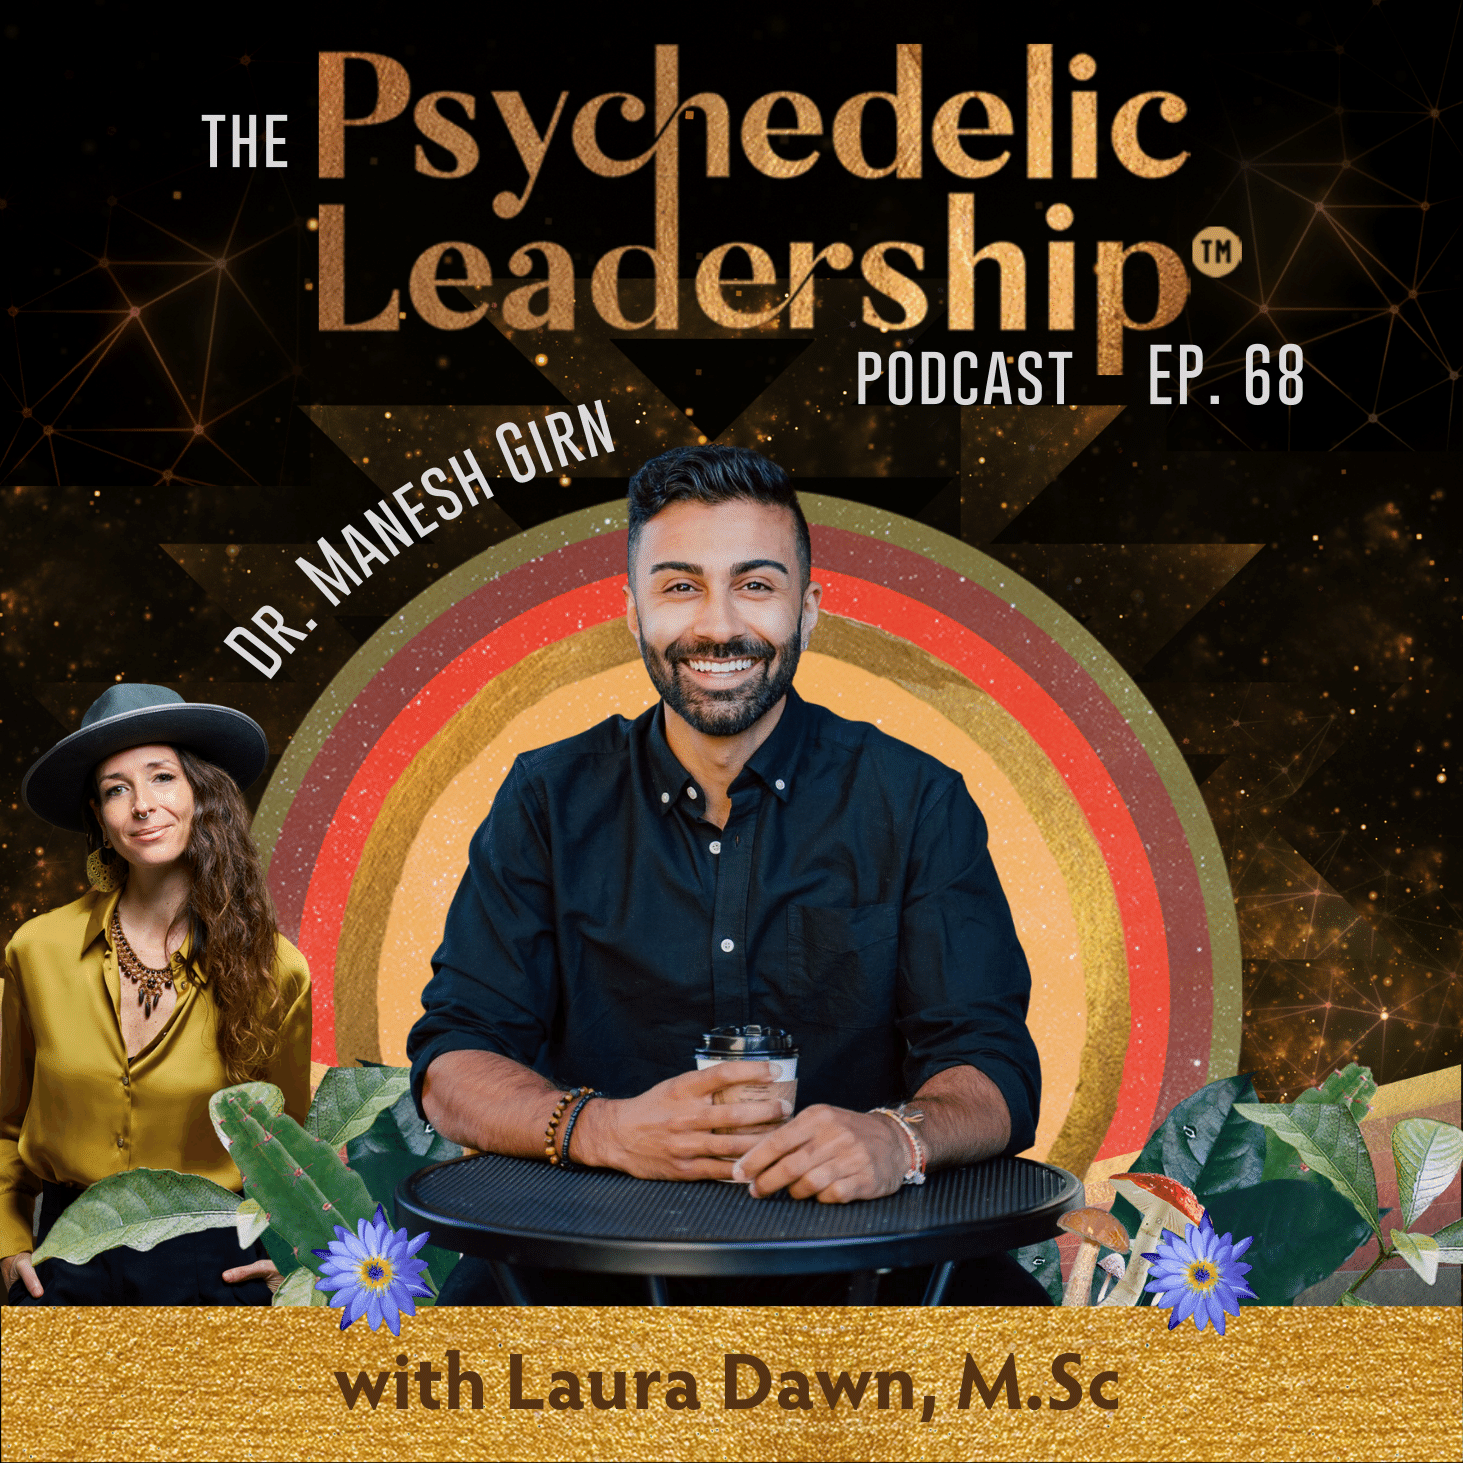 Artwork for podcast The Psychedelic Leadership Podcast